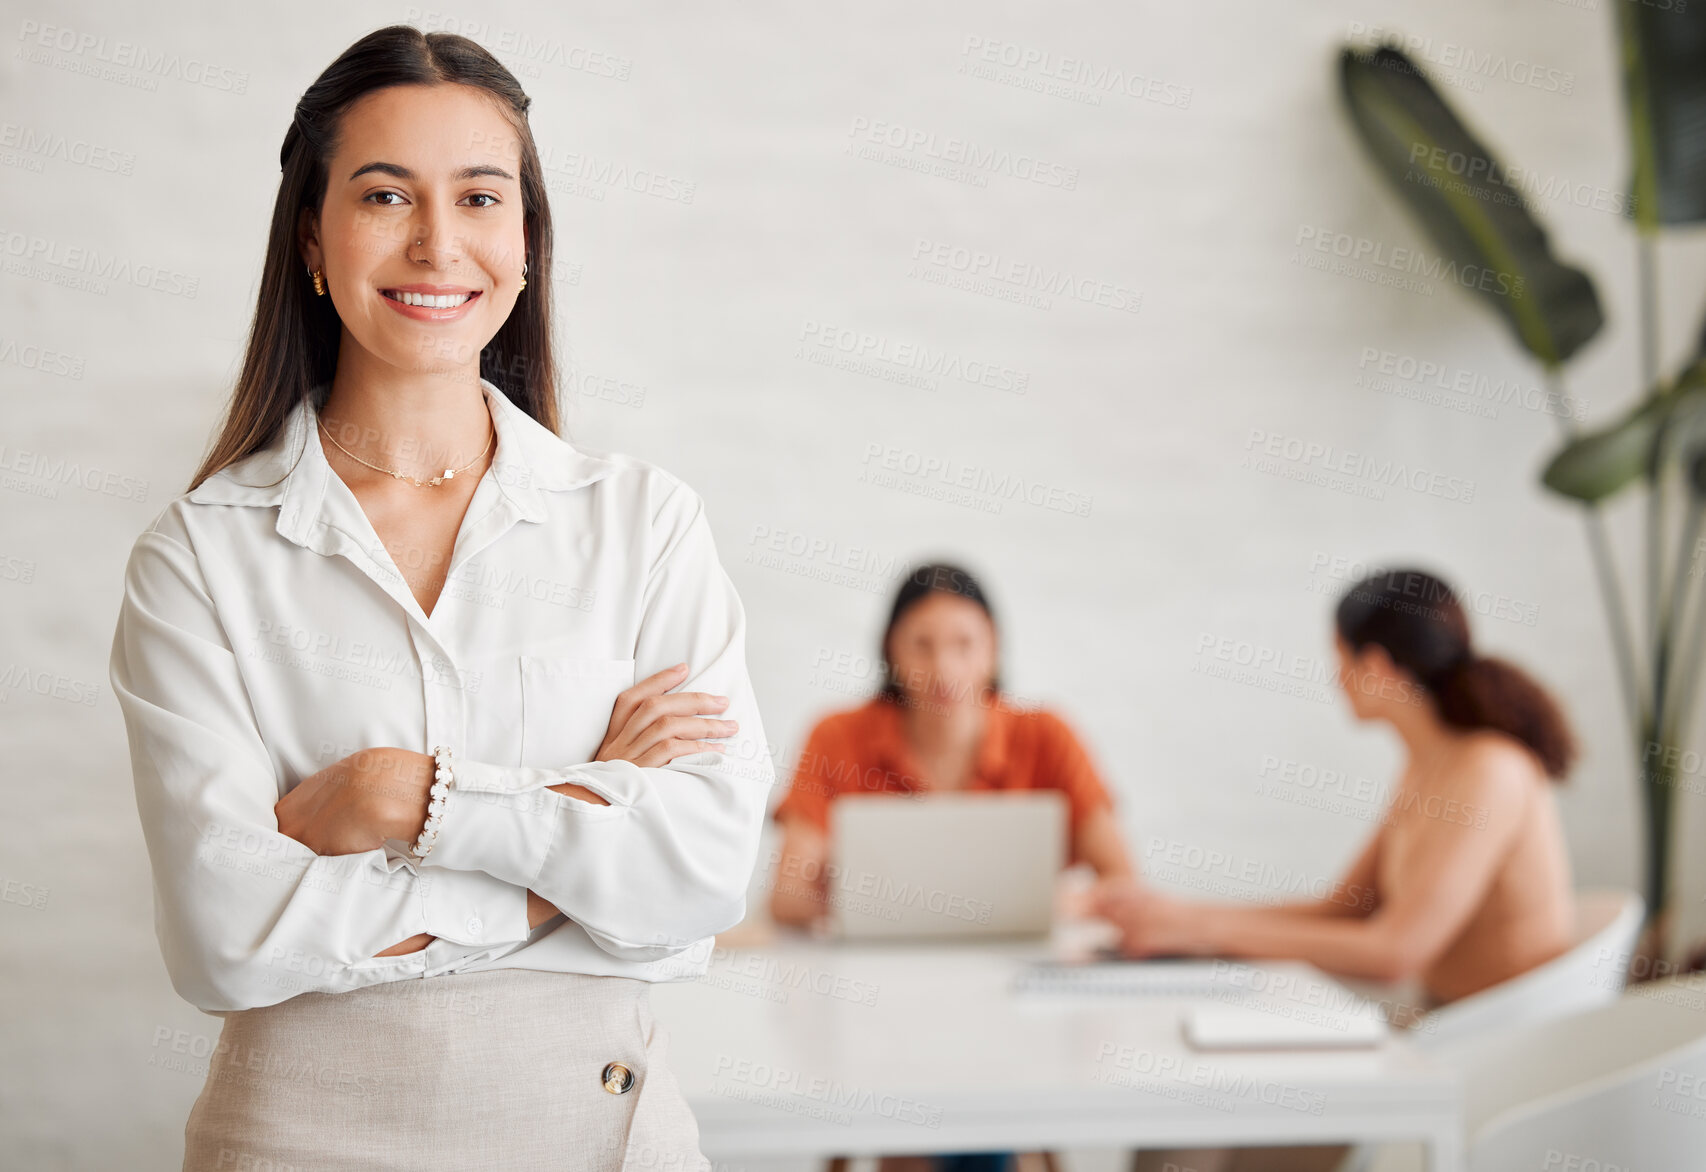 Buy stock photo Portrait of one confident young hispanic business woman standing with arms crossed in an office with her colleagues in the background. Ambitious entrepreneur and determined leader ready for success in a creative startup agency